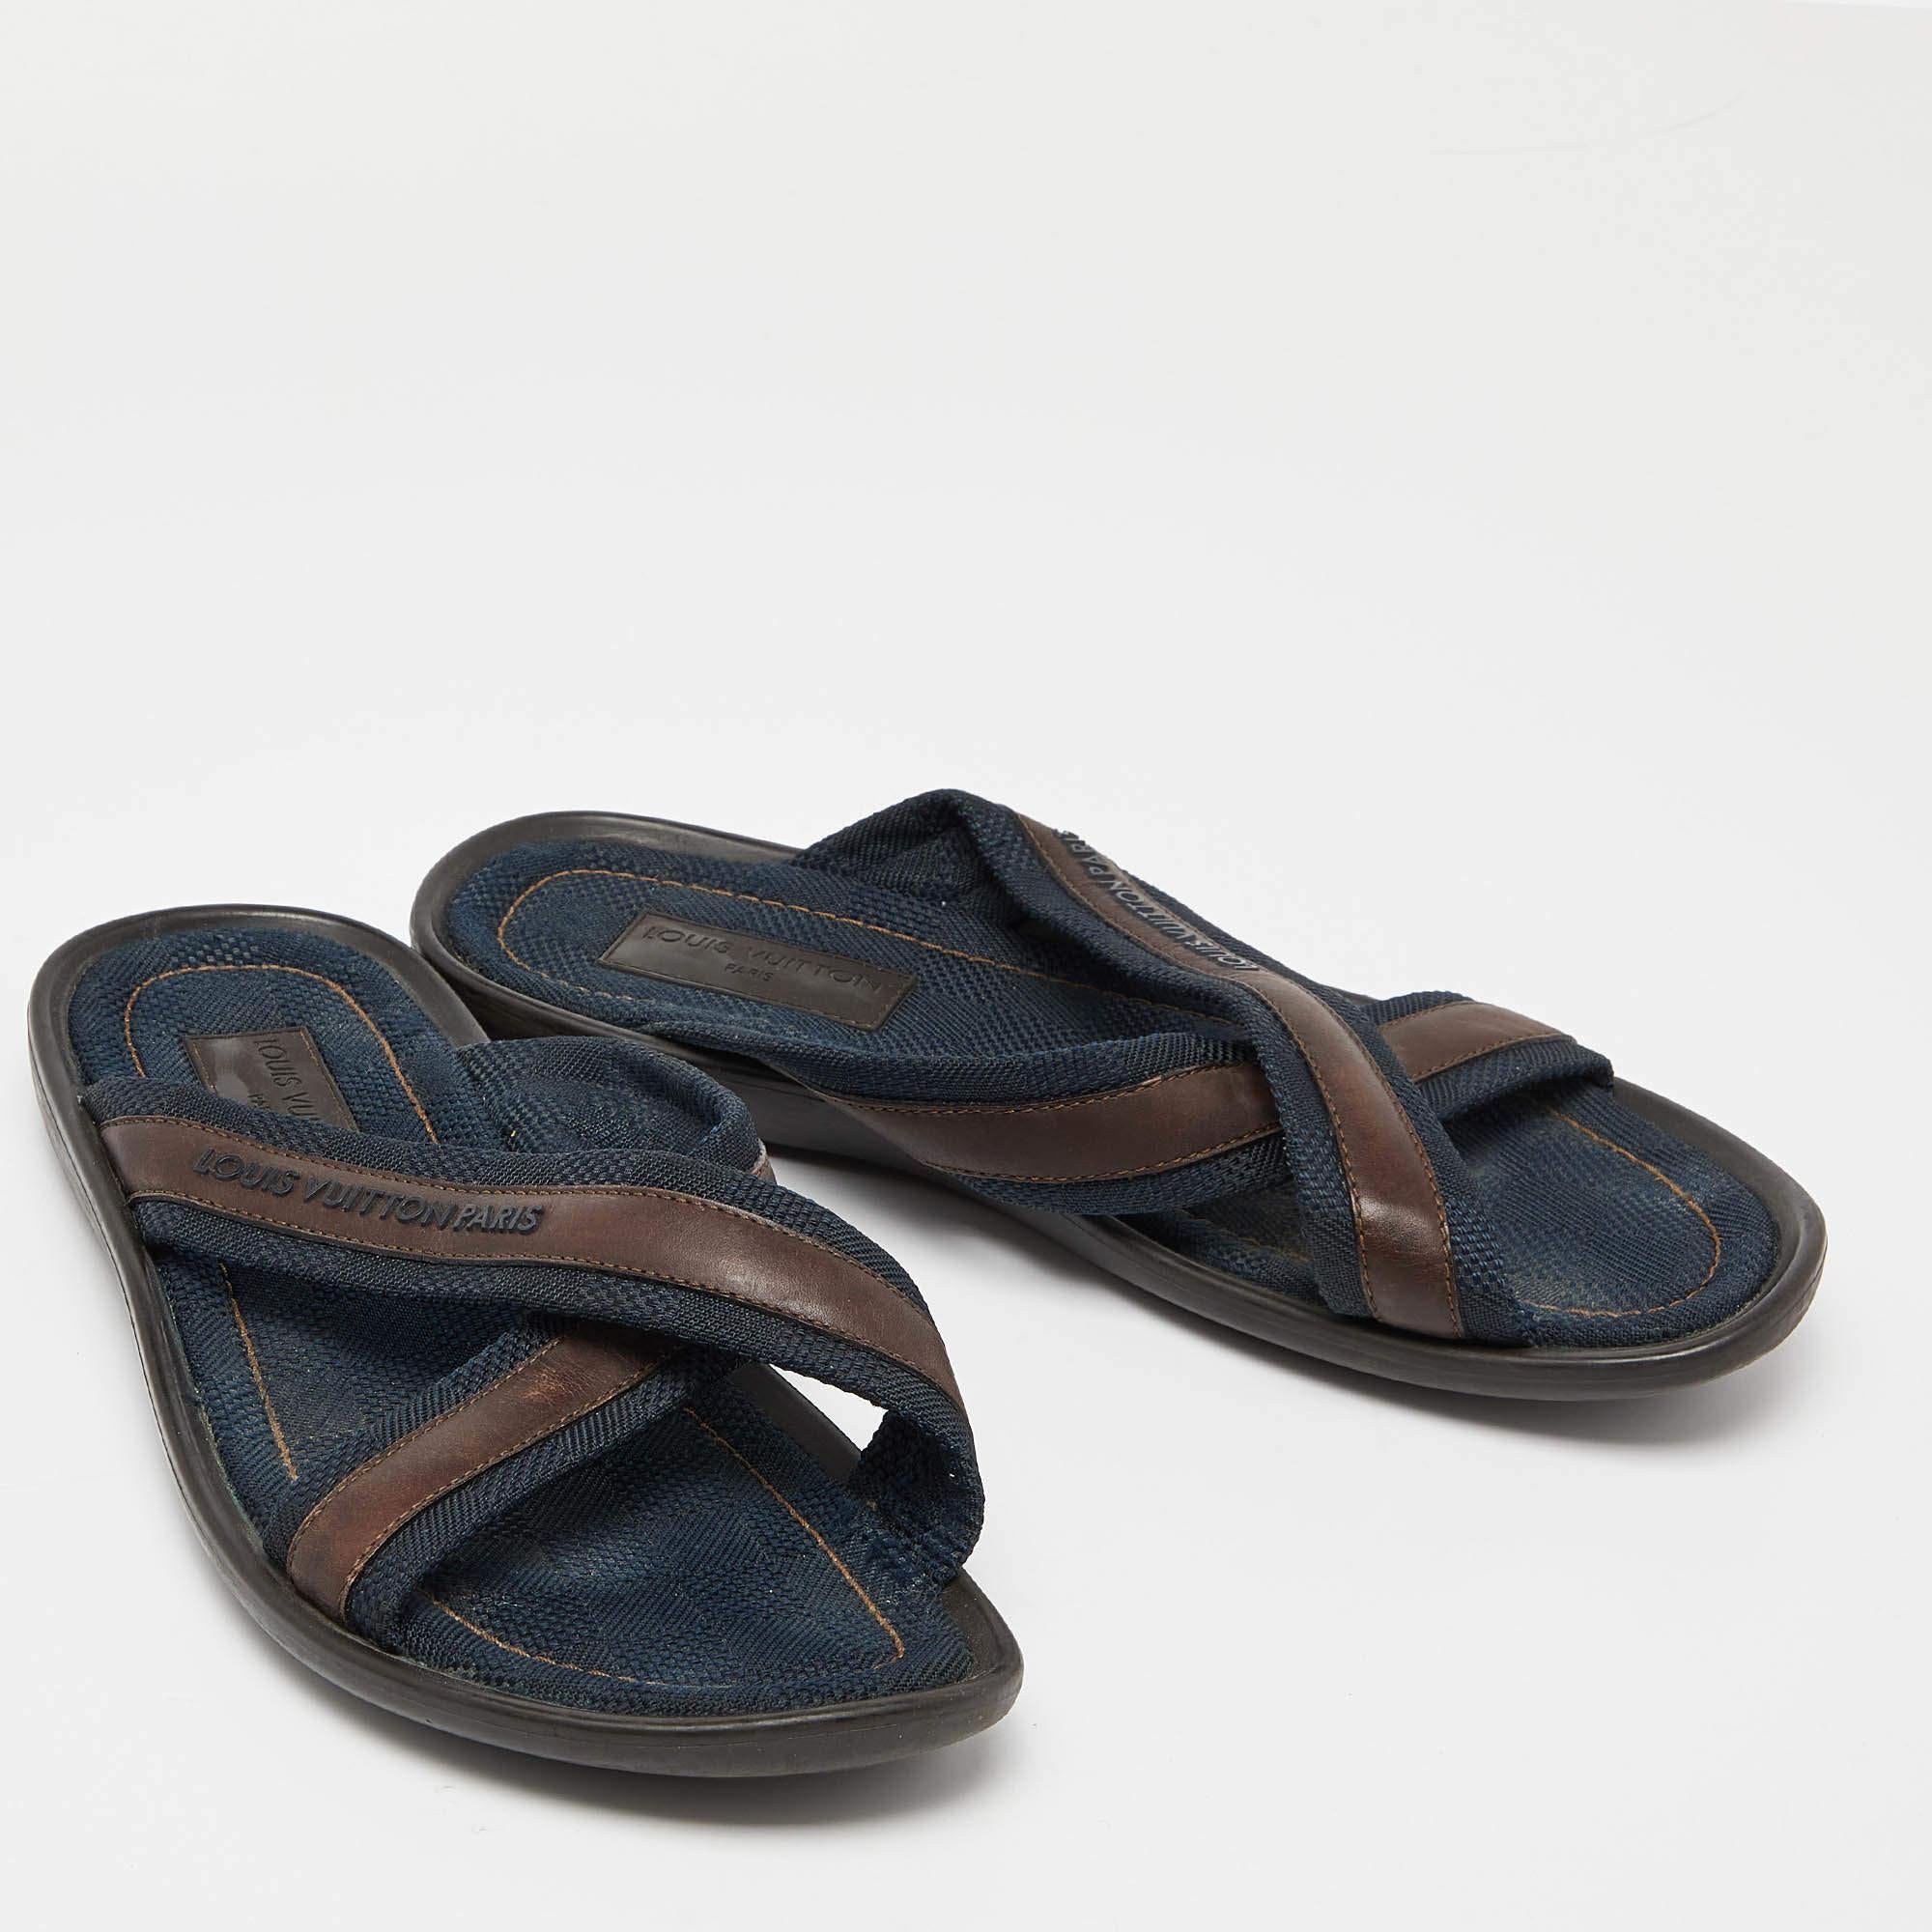 Louis Vuitton Navy Blue/Brown Canvas and Leather Cross Strap Slides Size 43 In Good Condition For Sale In Dubai, Al Qouz 2